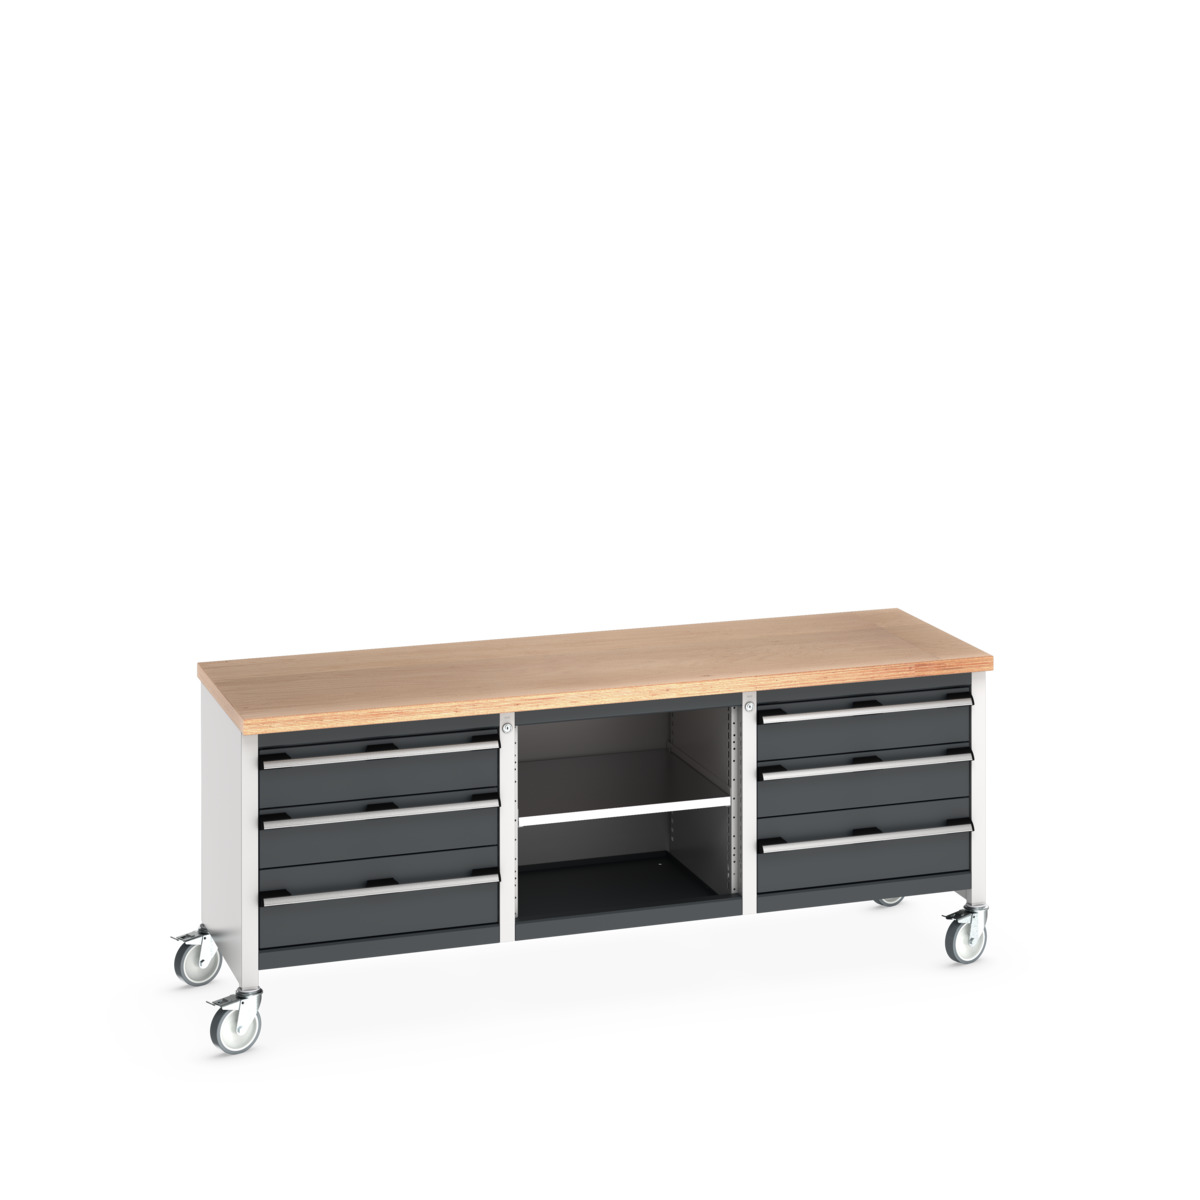 41002130.19V - cubio mobile storage bench (mpx)